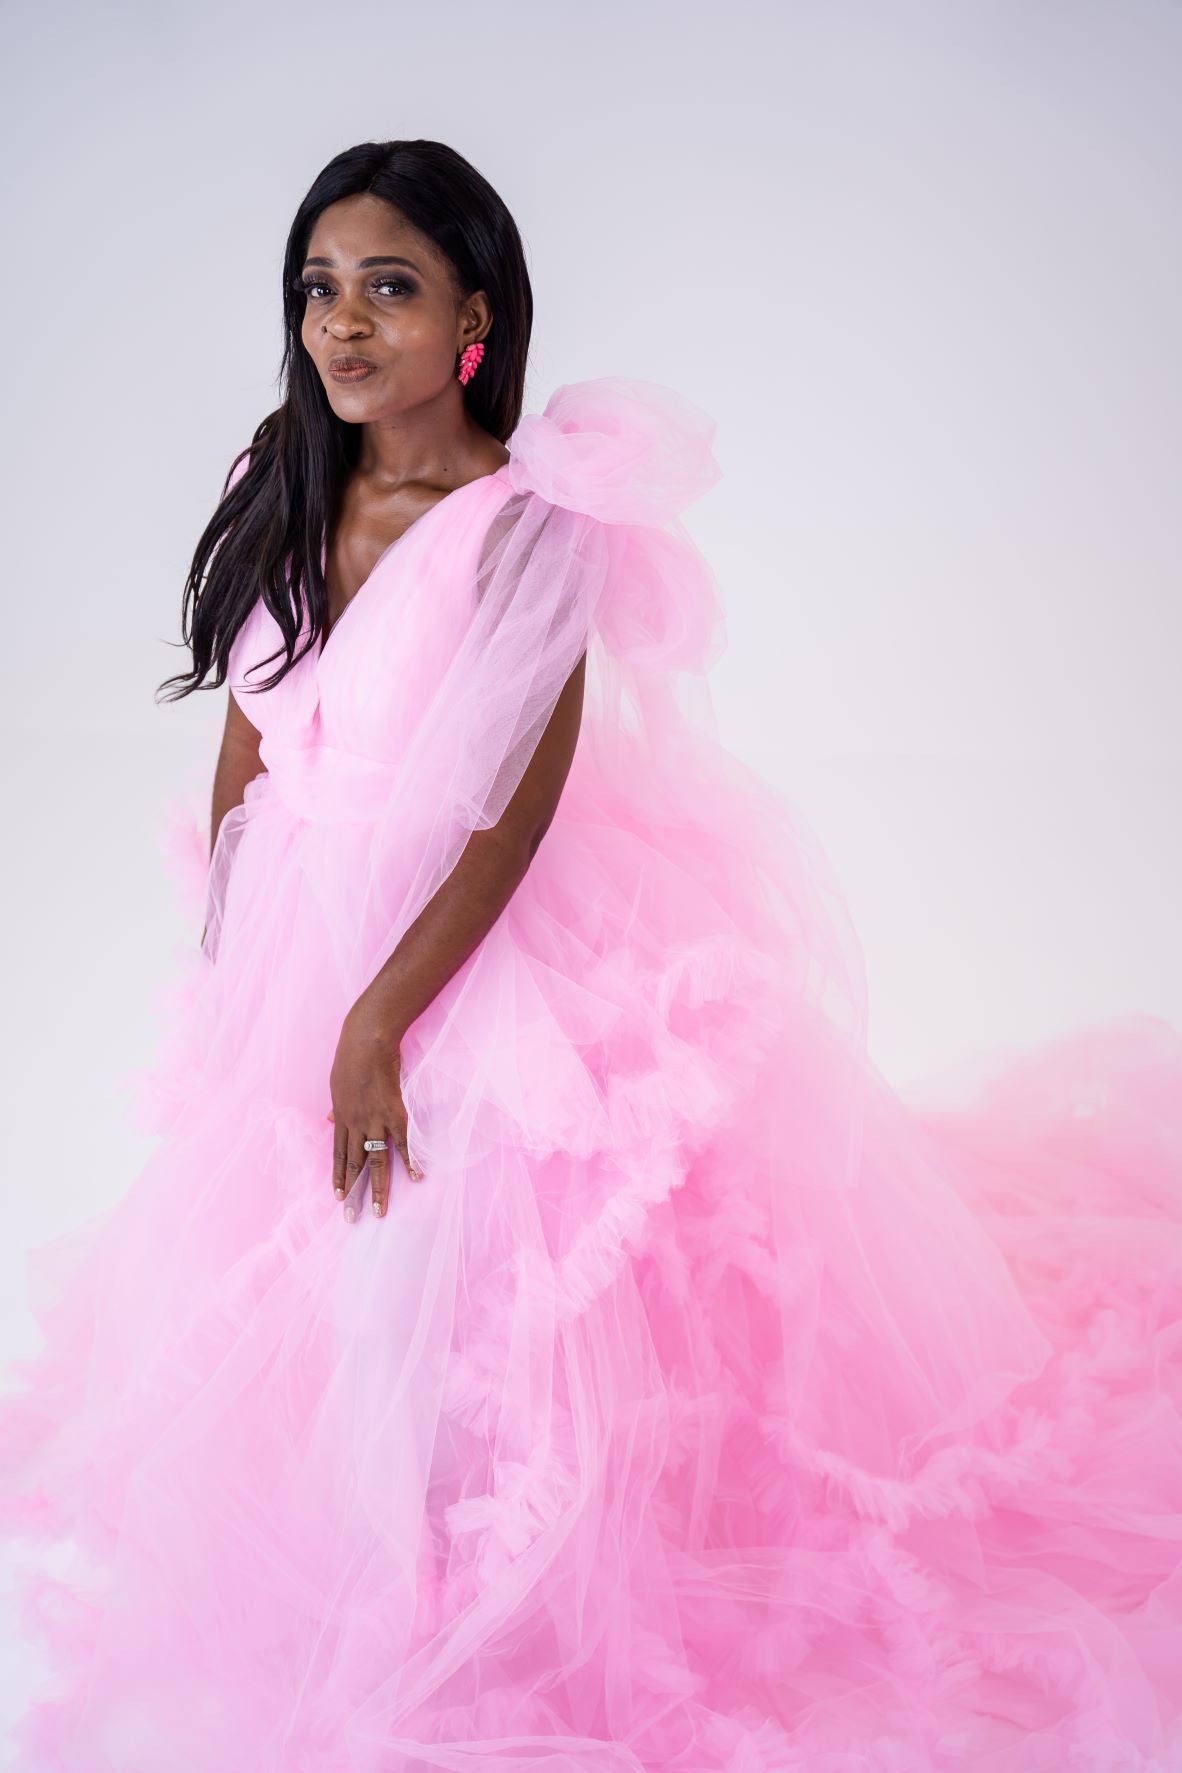 Maternity Photoshoot Dresses - Extra Puffy - Pink Tulle Dress - 4 DAY RENTAL - Luxe Bumps AU